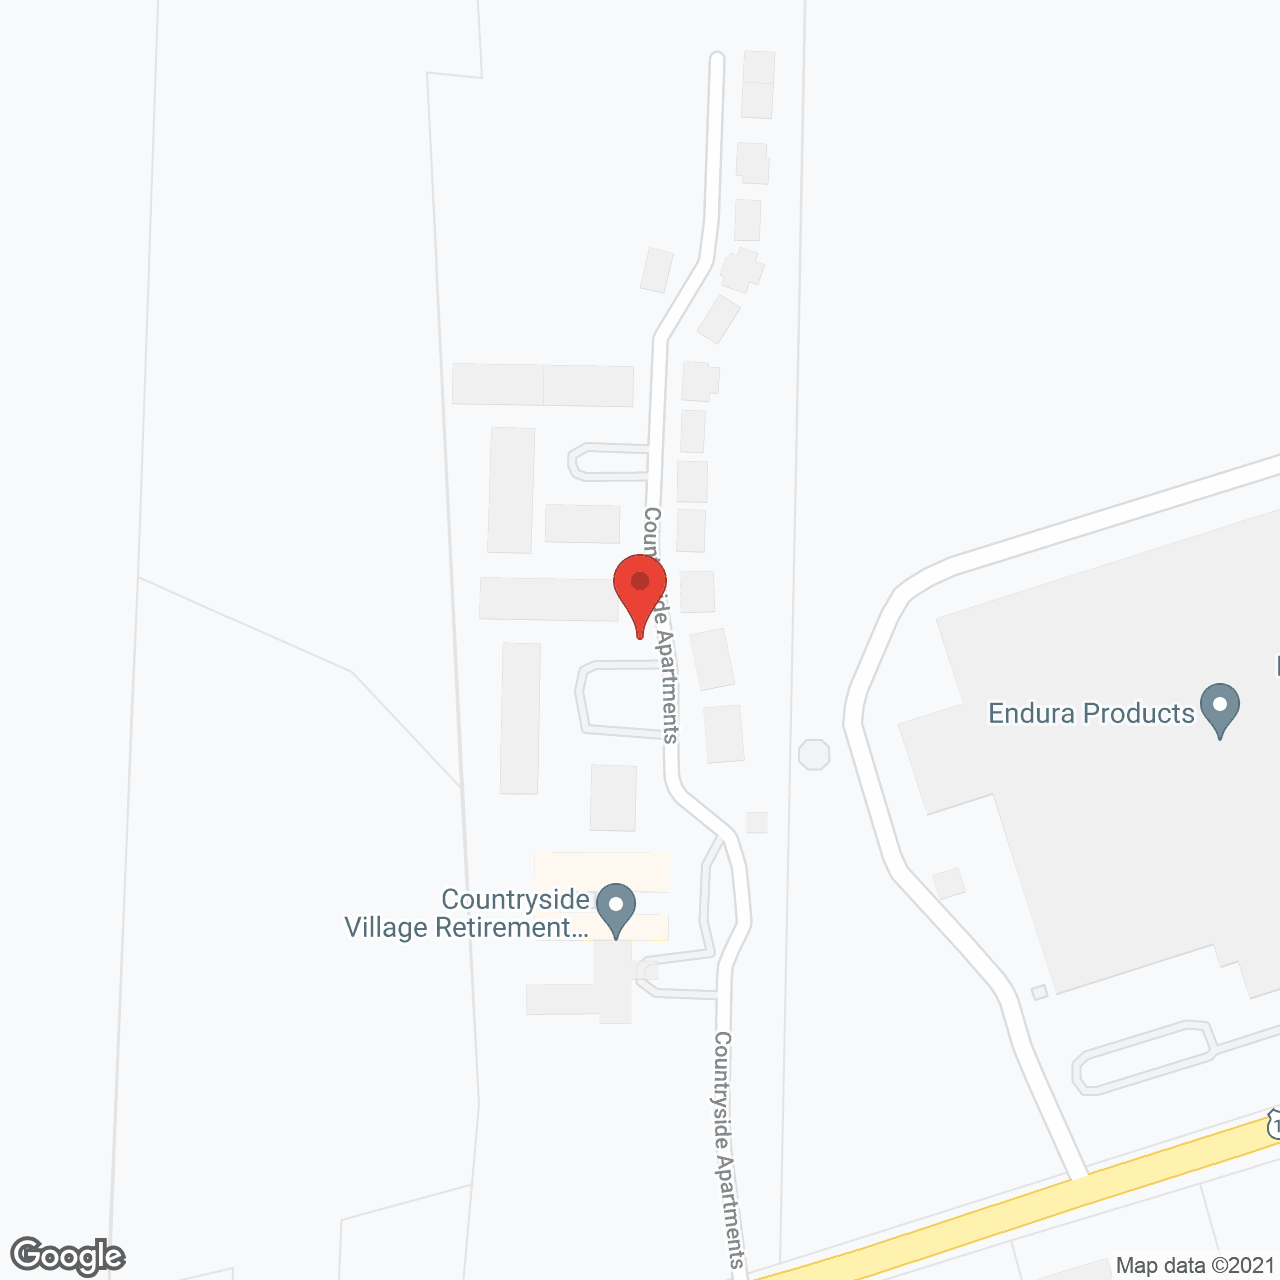 Countryside Village Retirement Community in google map